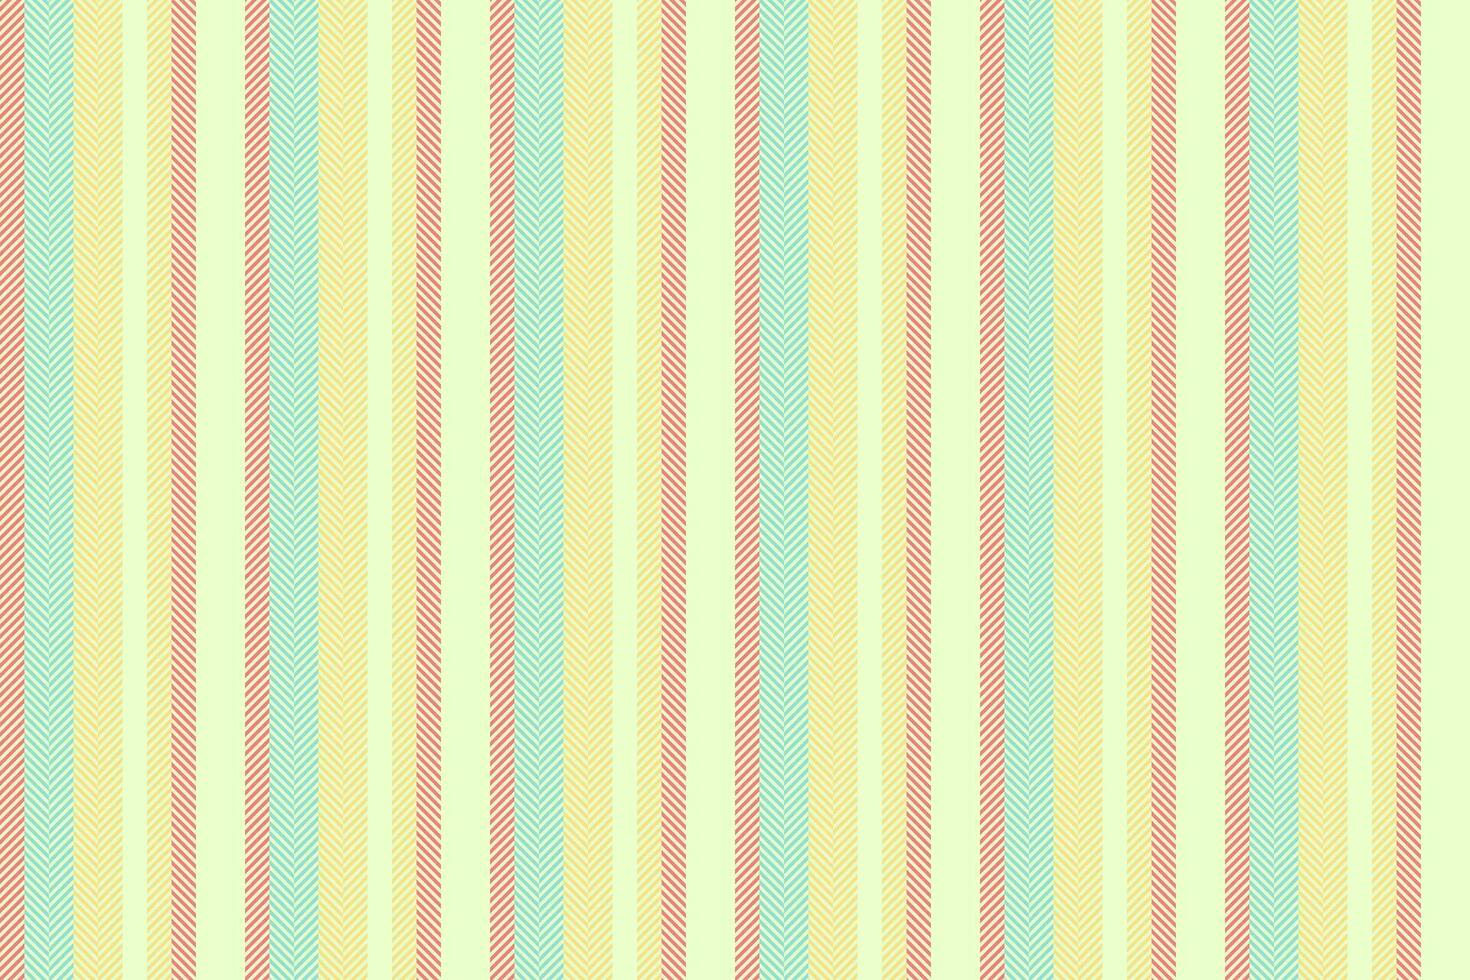 Bed pattern vector background, golf lines stripe seamless. Manufacture fabric vertical texture textile in light and yellow colors.